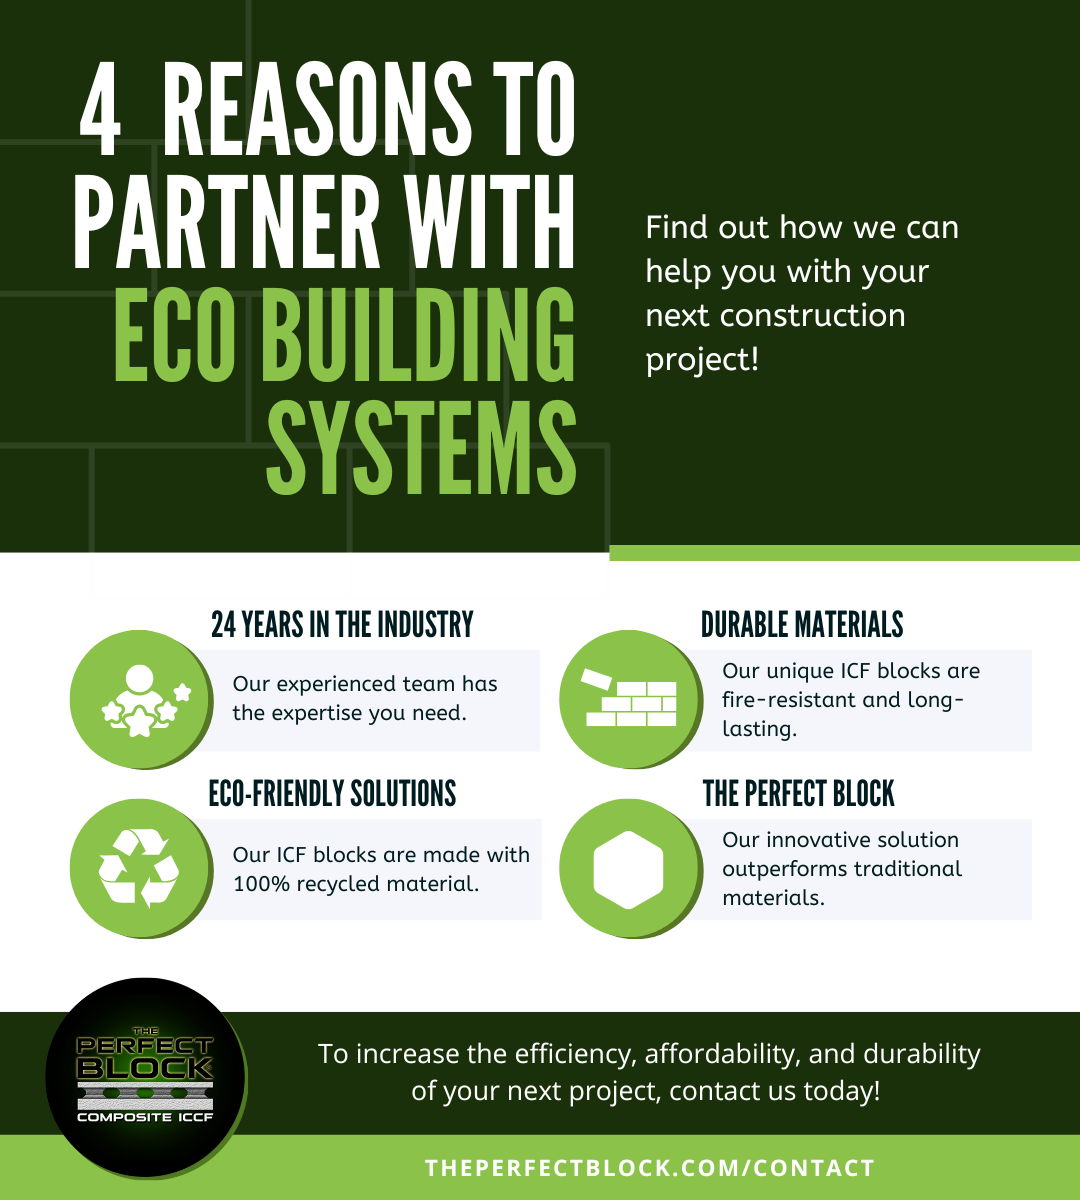 M37281 - Infographic - 4 Reasons To Partner With Eco Building Systems.png